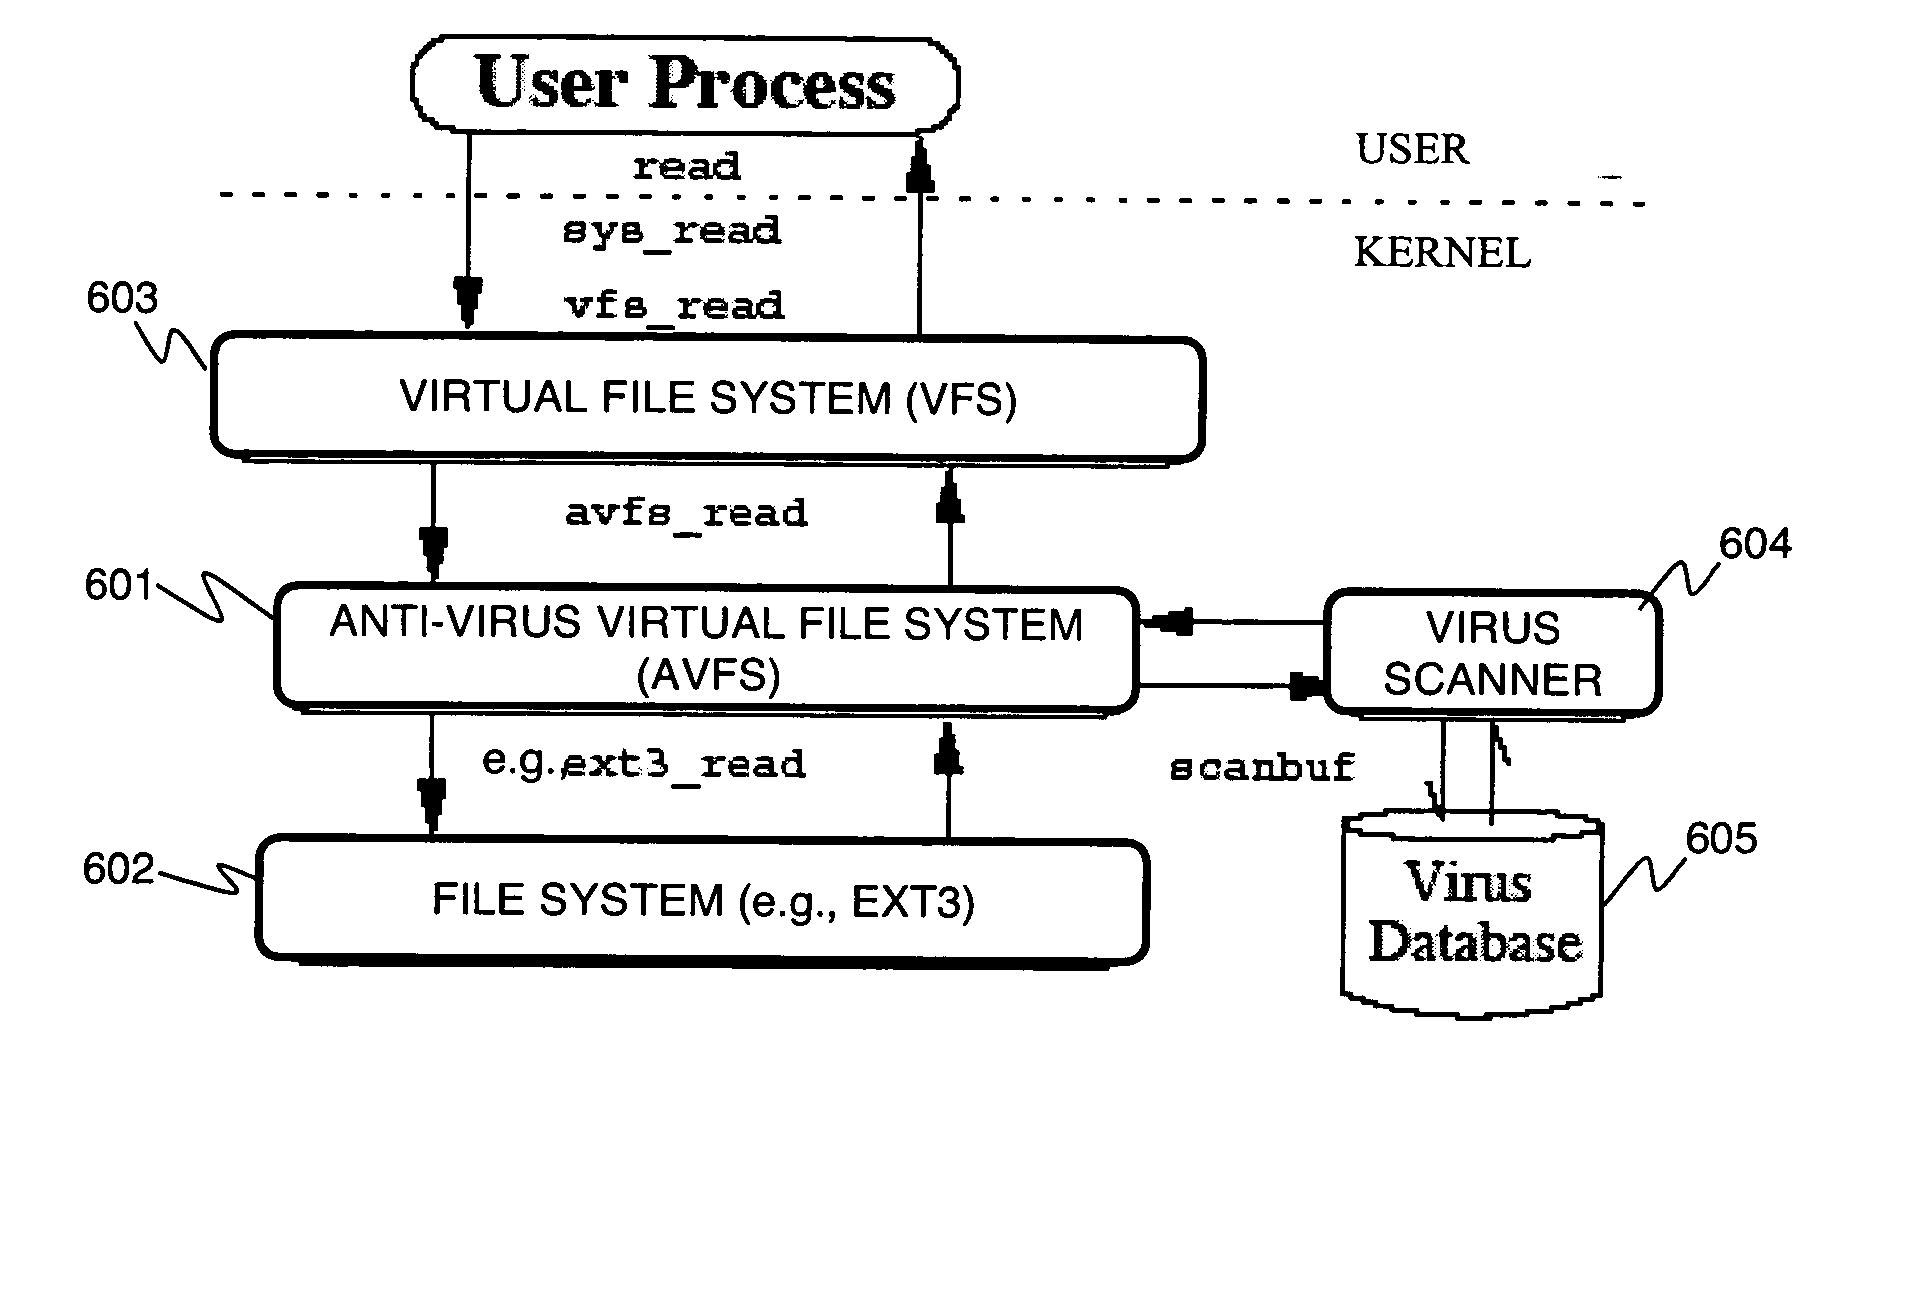 Stackable file systems and methods thereof